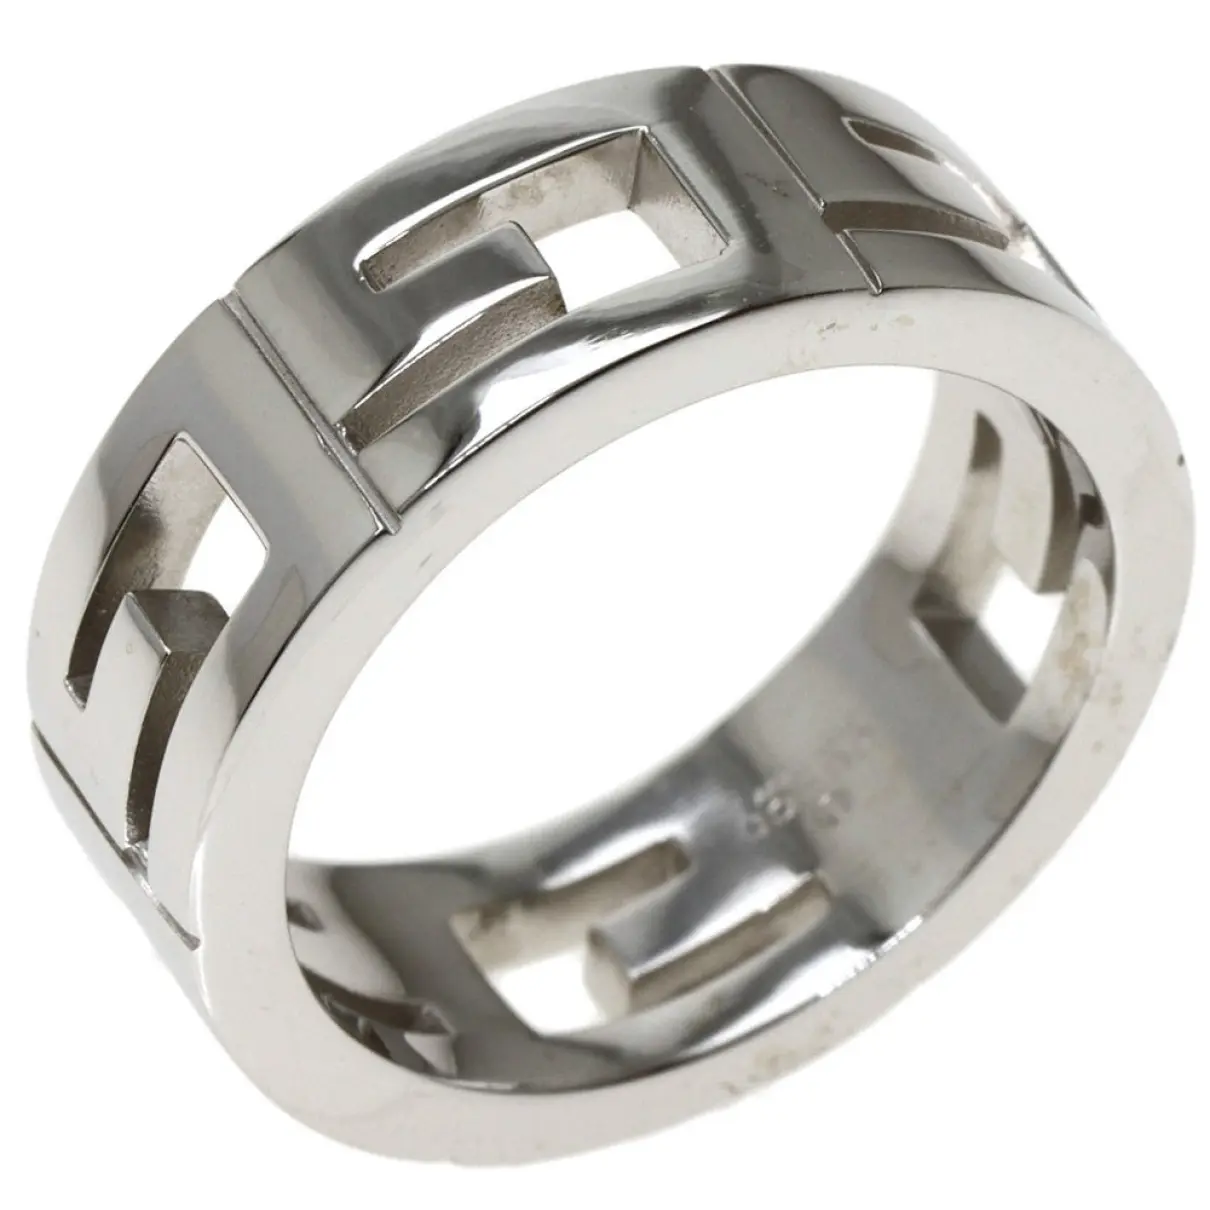 Buy Gucci White gold ring online